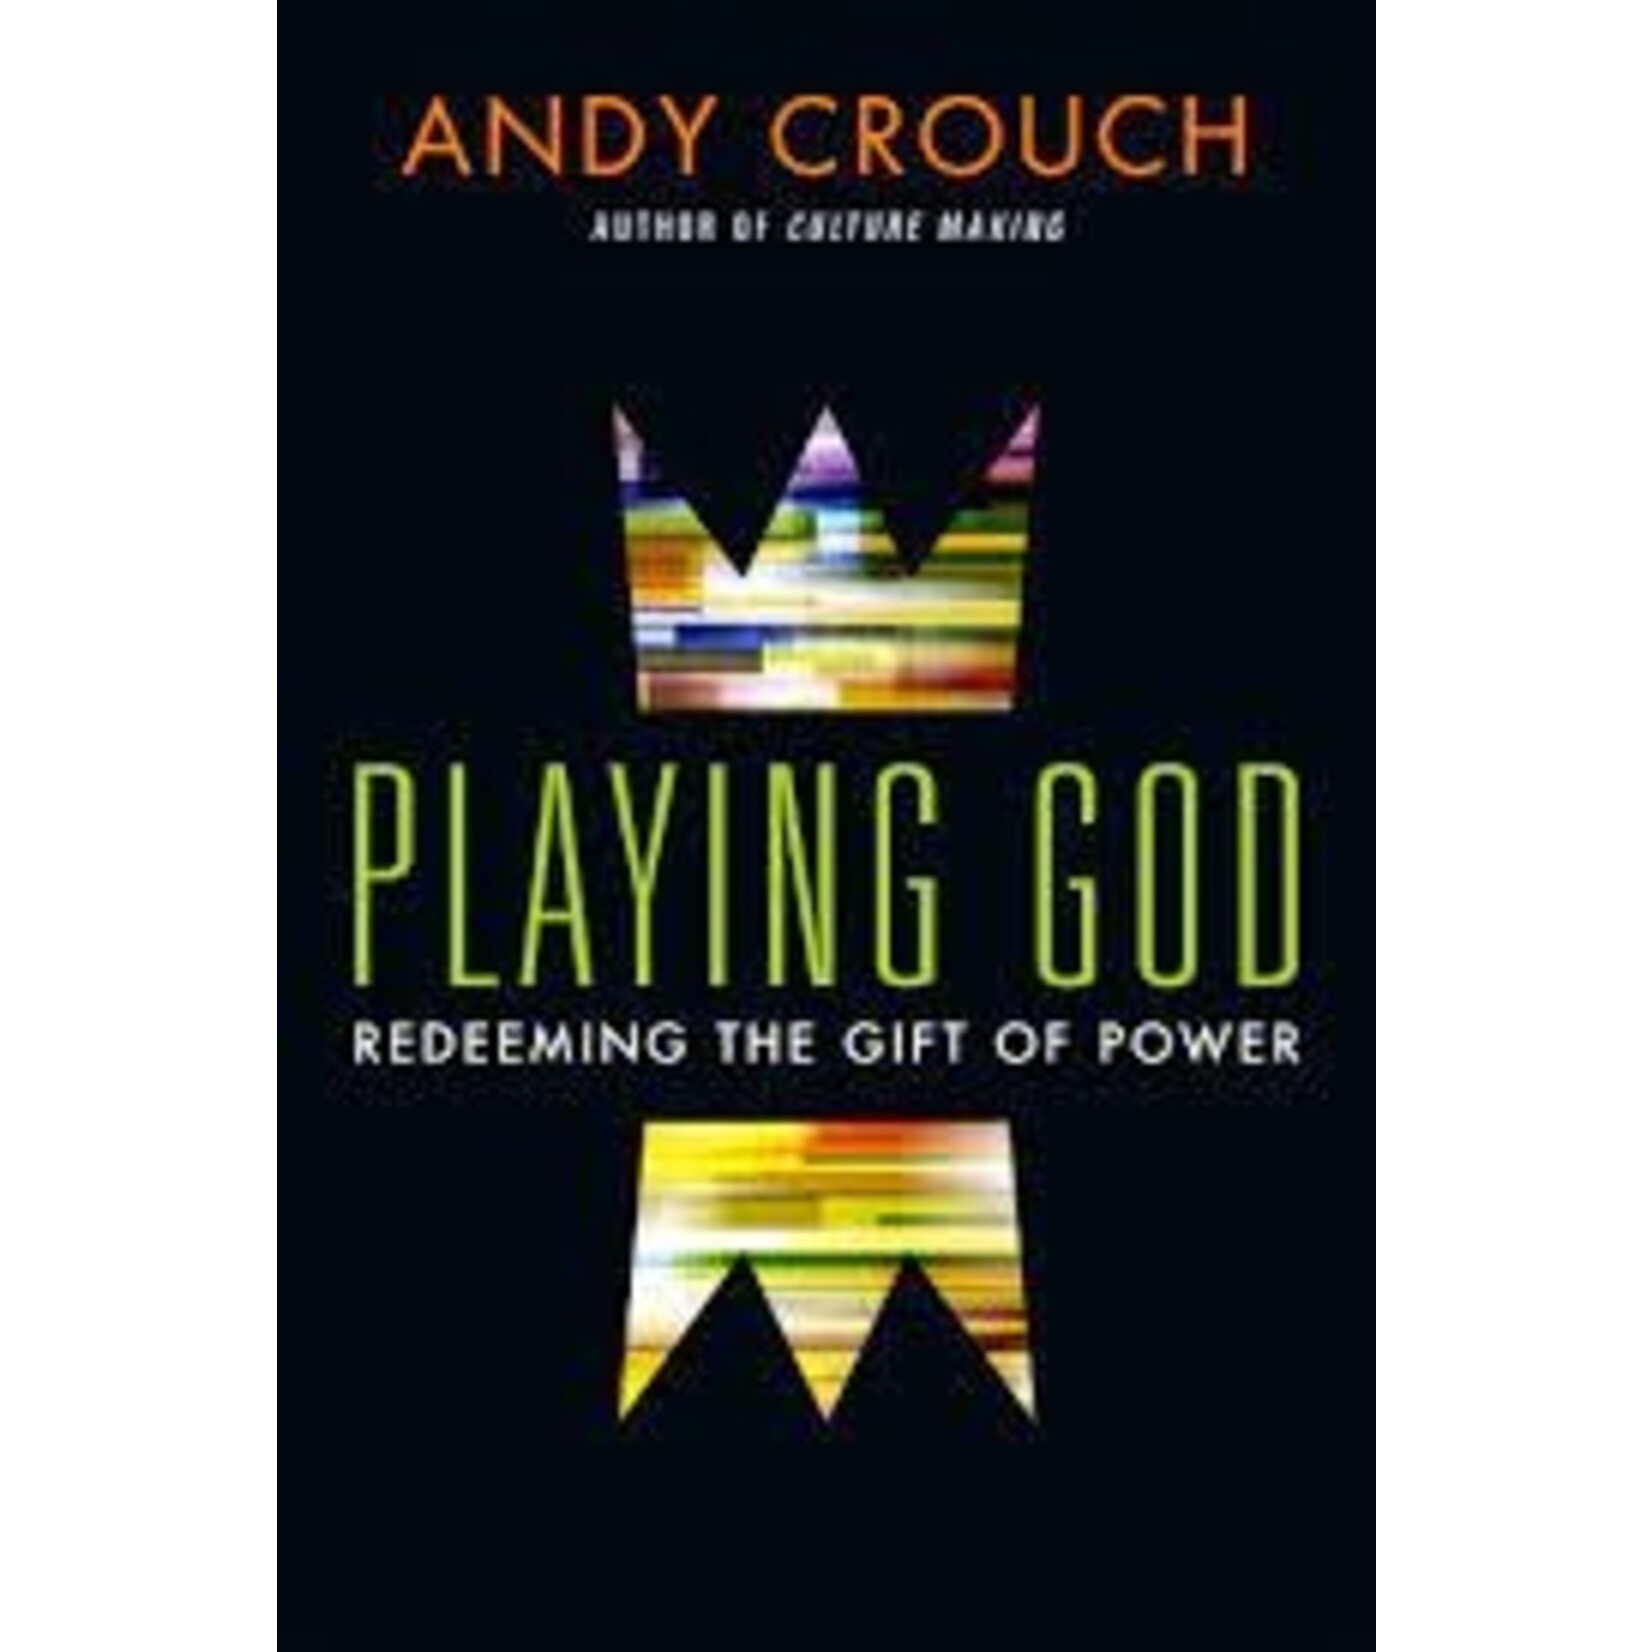 Playing God: Redeeming the Gift of Power